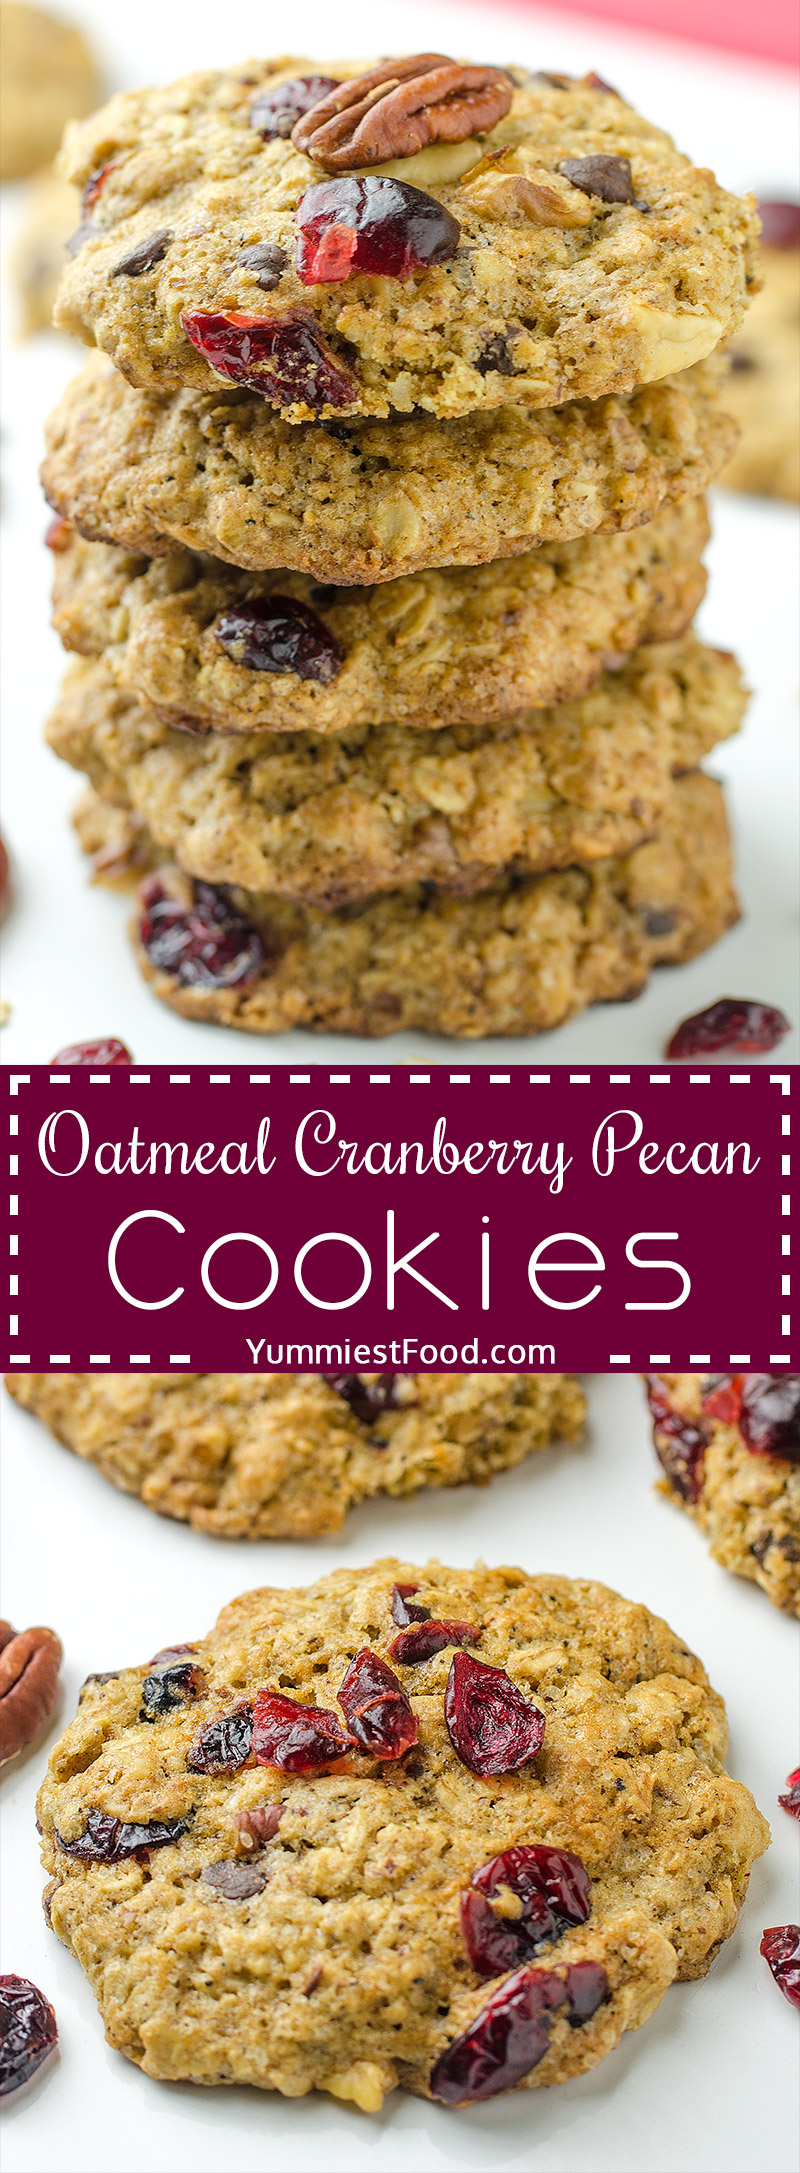 Breakfast Oatmeal Cranberry Pecan Cookies - Soft and chewy oatmeal cookies packed with cranberries, pecans and chocolate chips